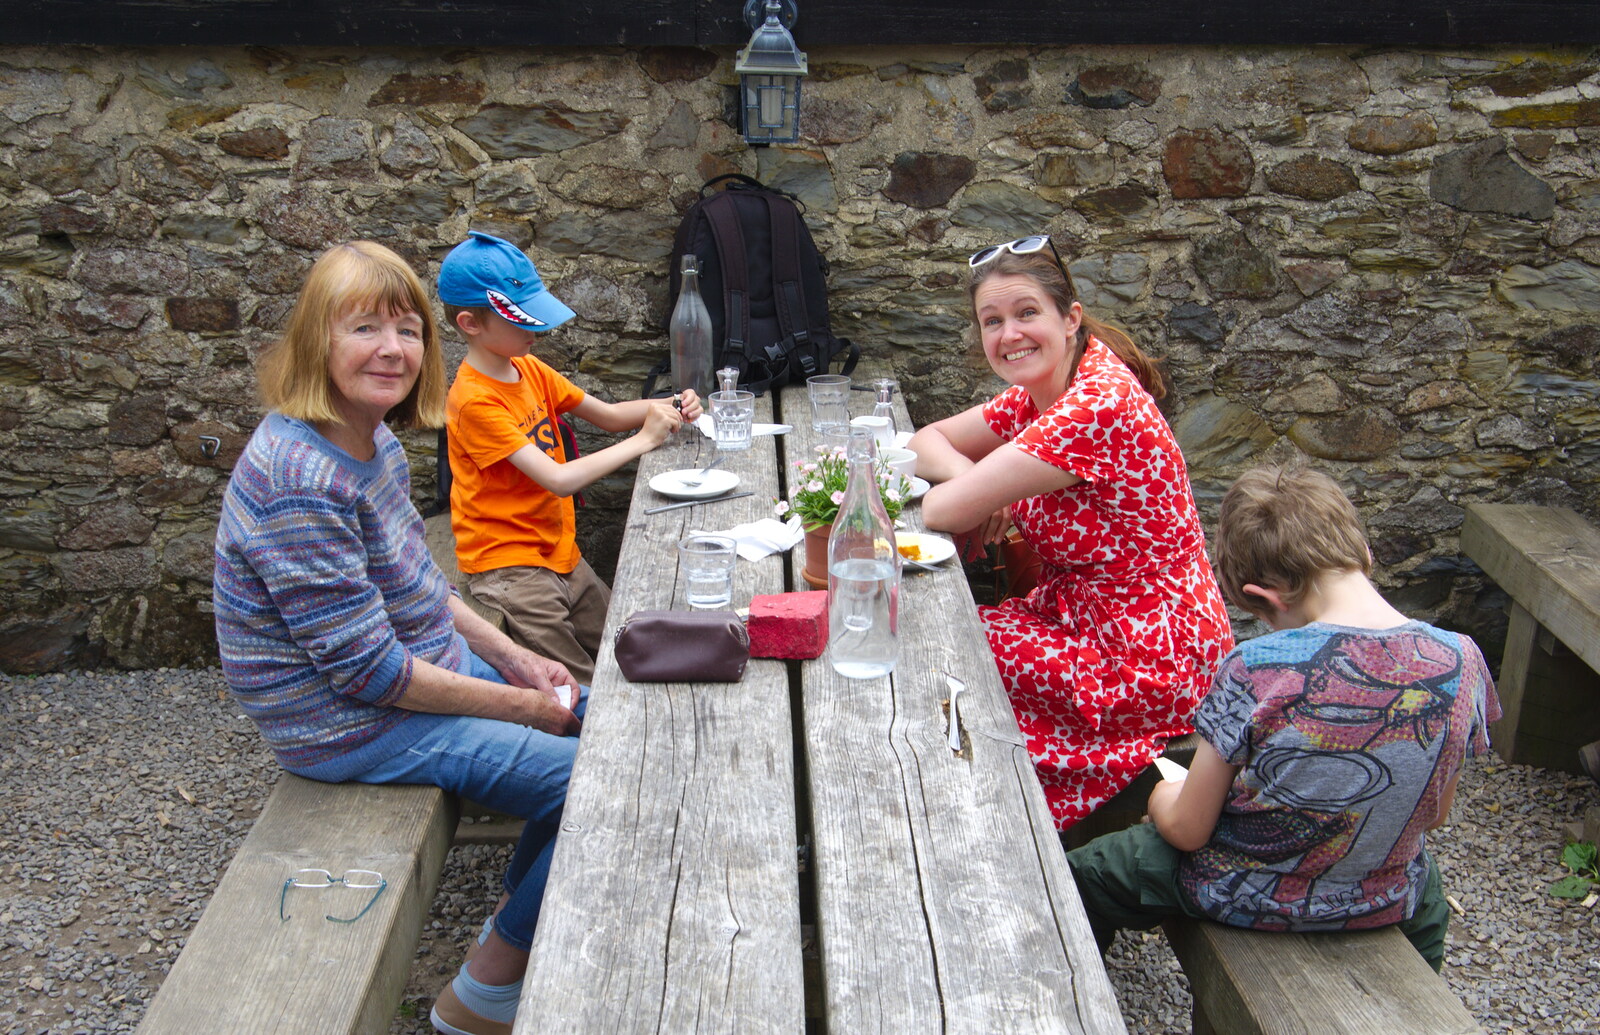 The gang from Chagford Lido and a Trip to Parke, Bovey Tracey, Devon - 25th May 2019